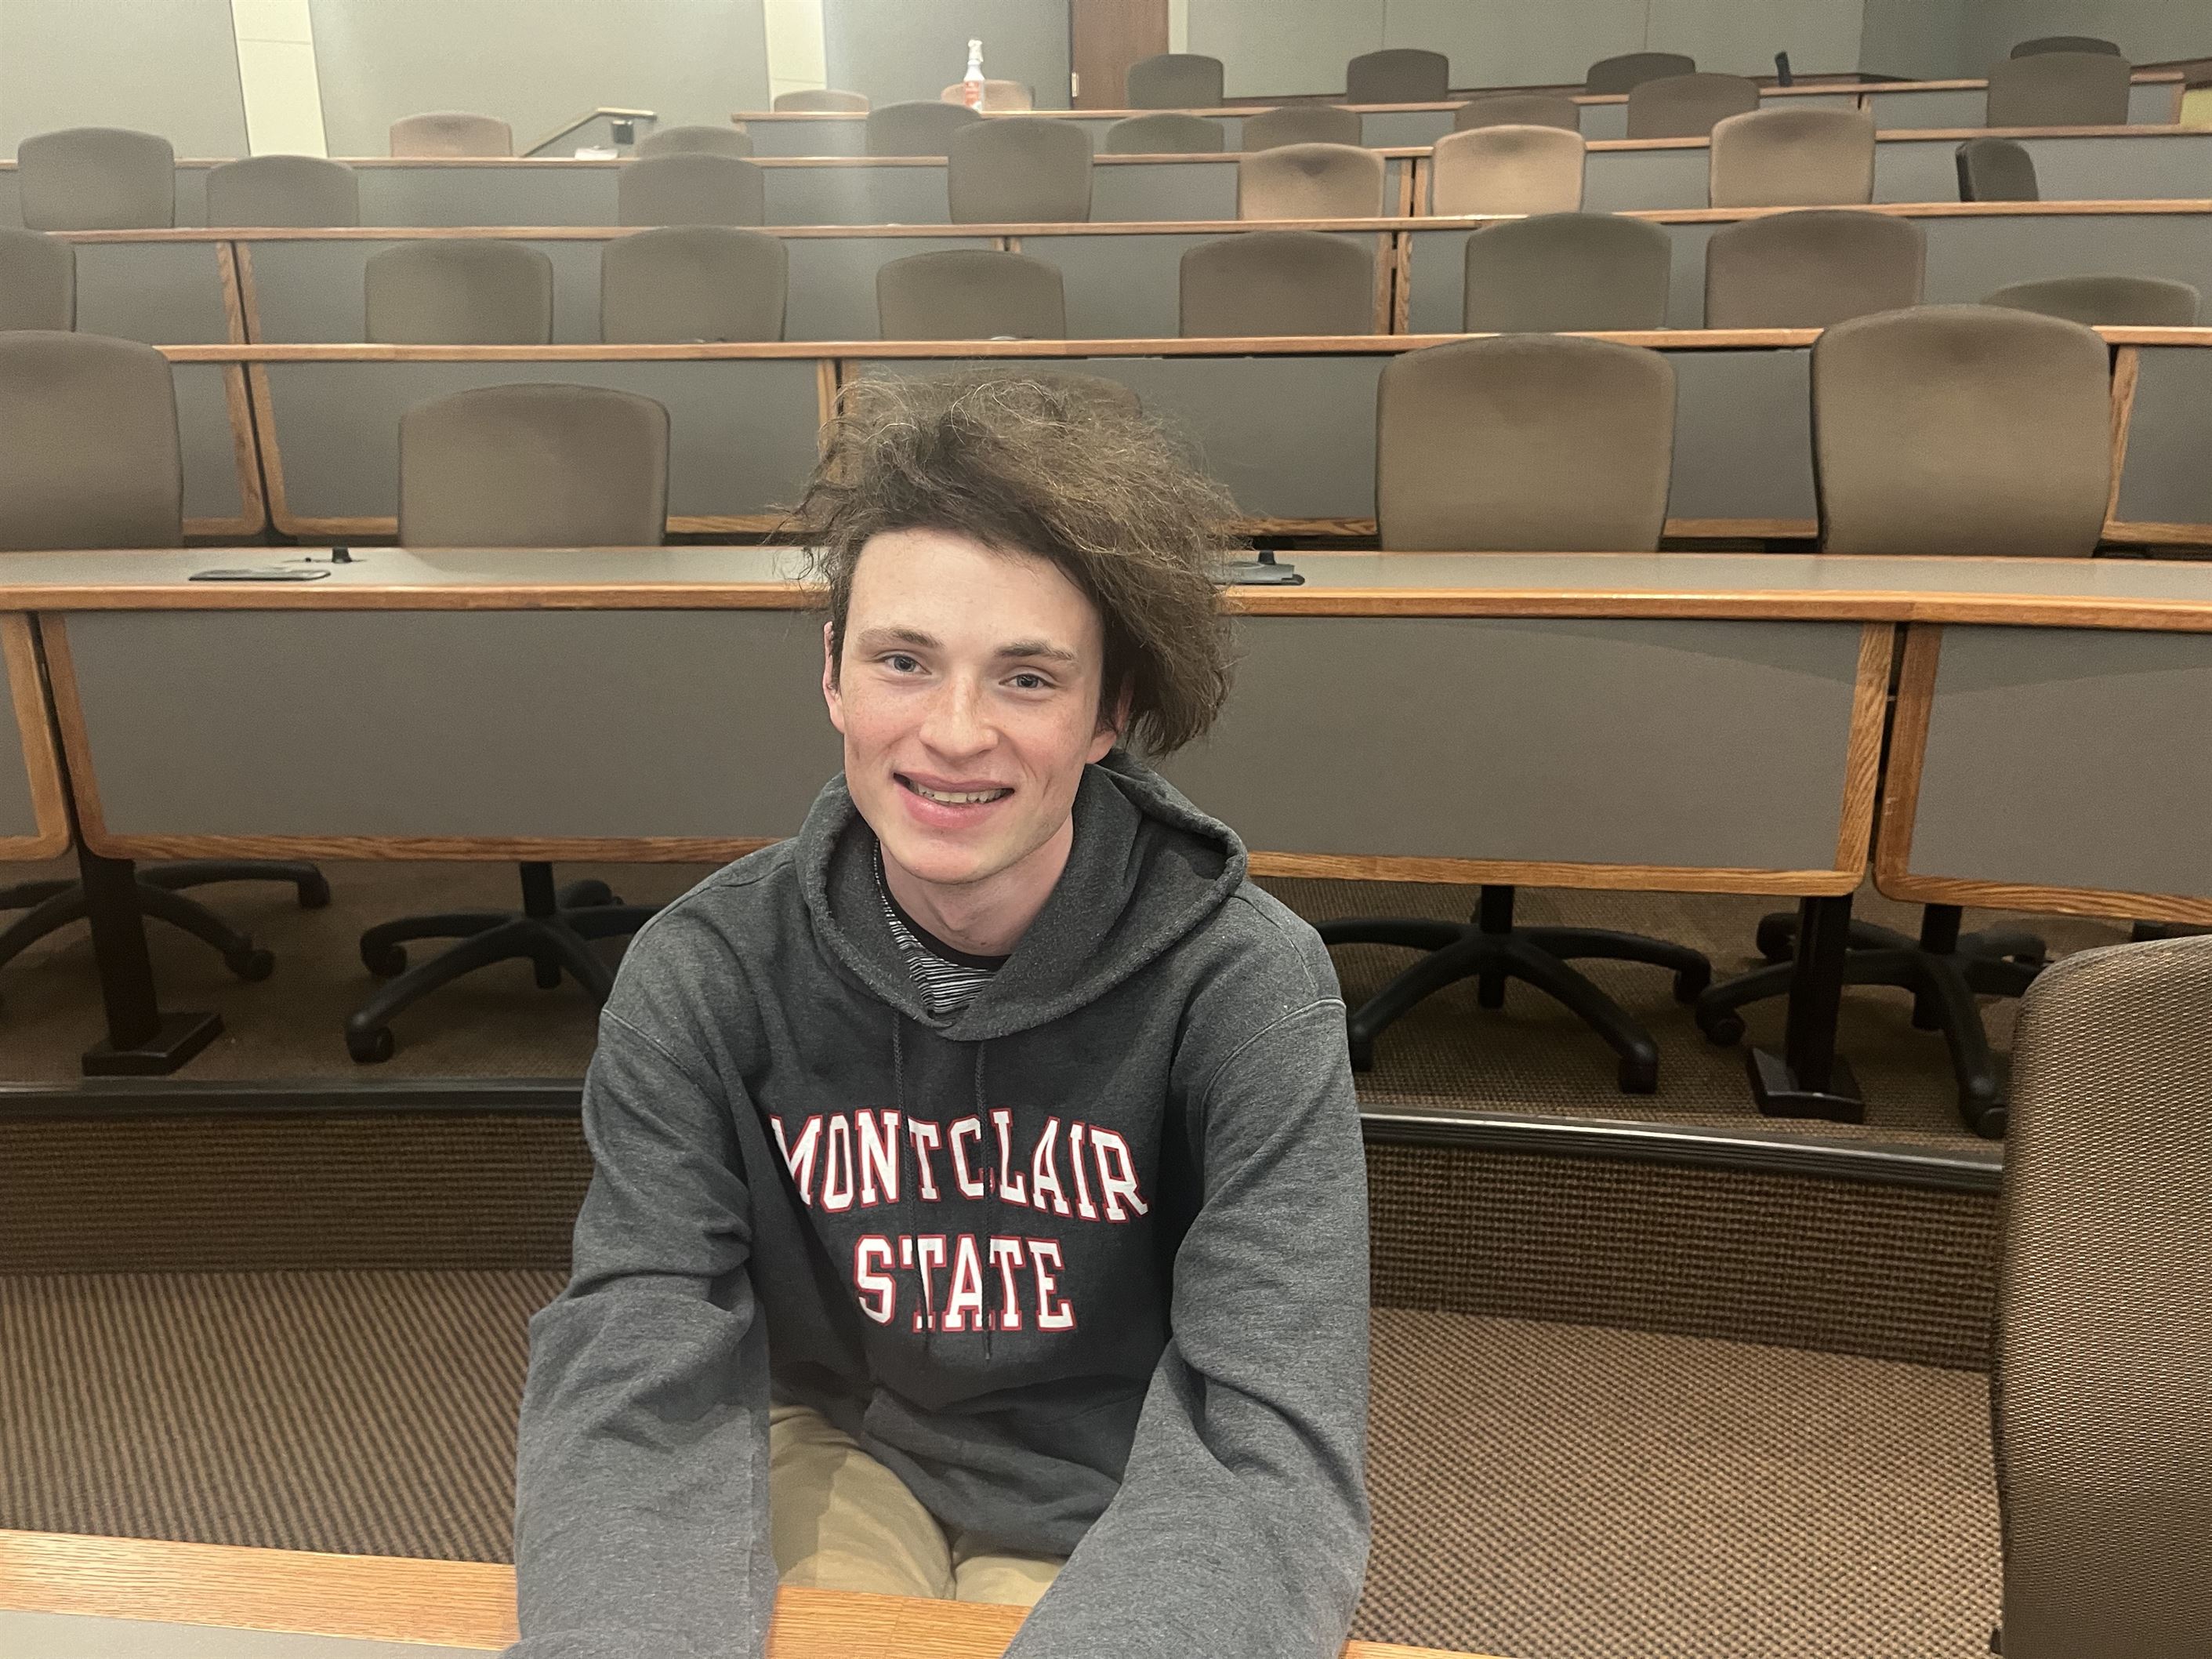 Jacob Goetz, a senior television and digital media major, found several aspects of the event interesting and educational.
Jenna Sundel | The Montclarion